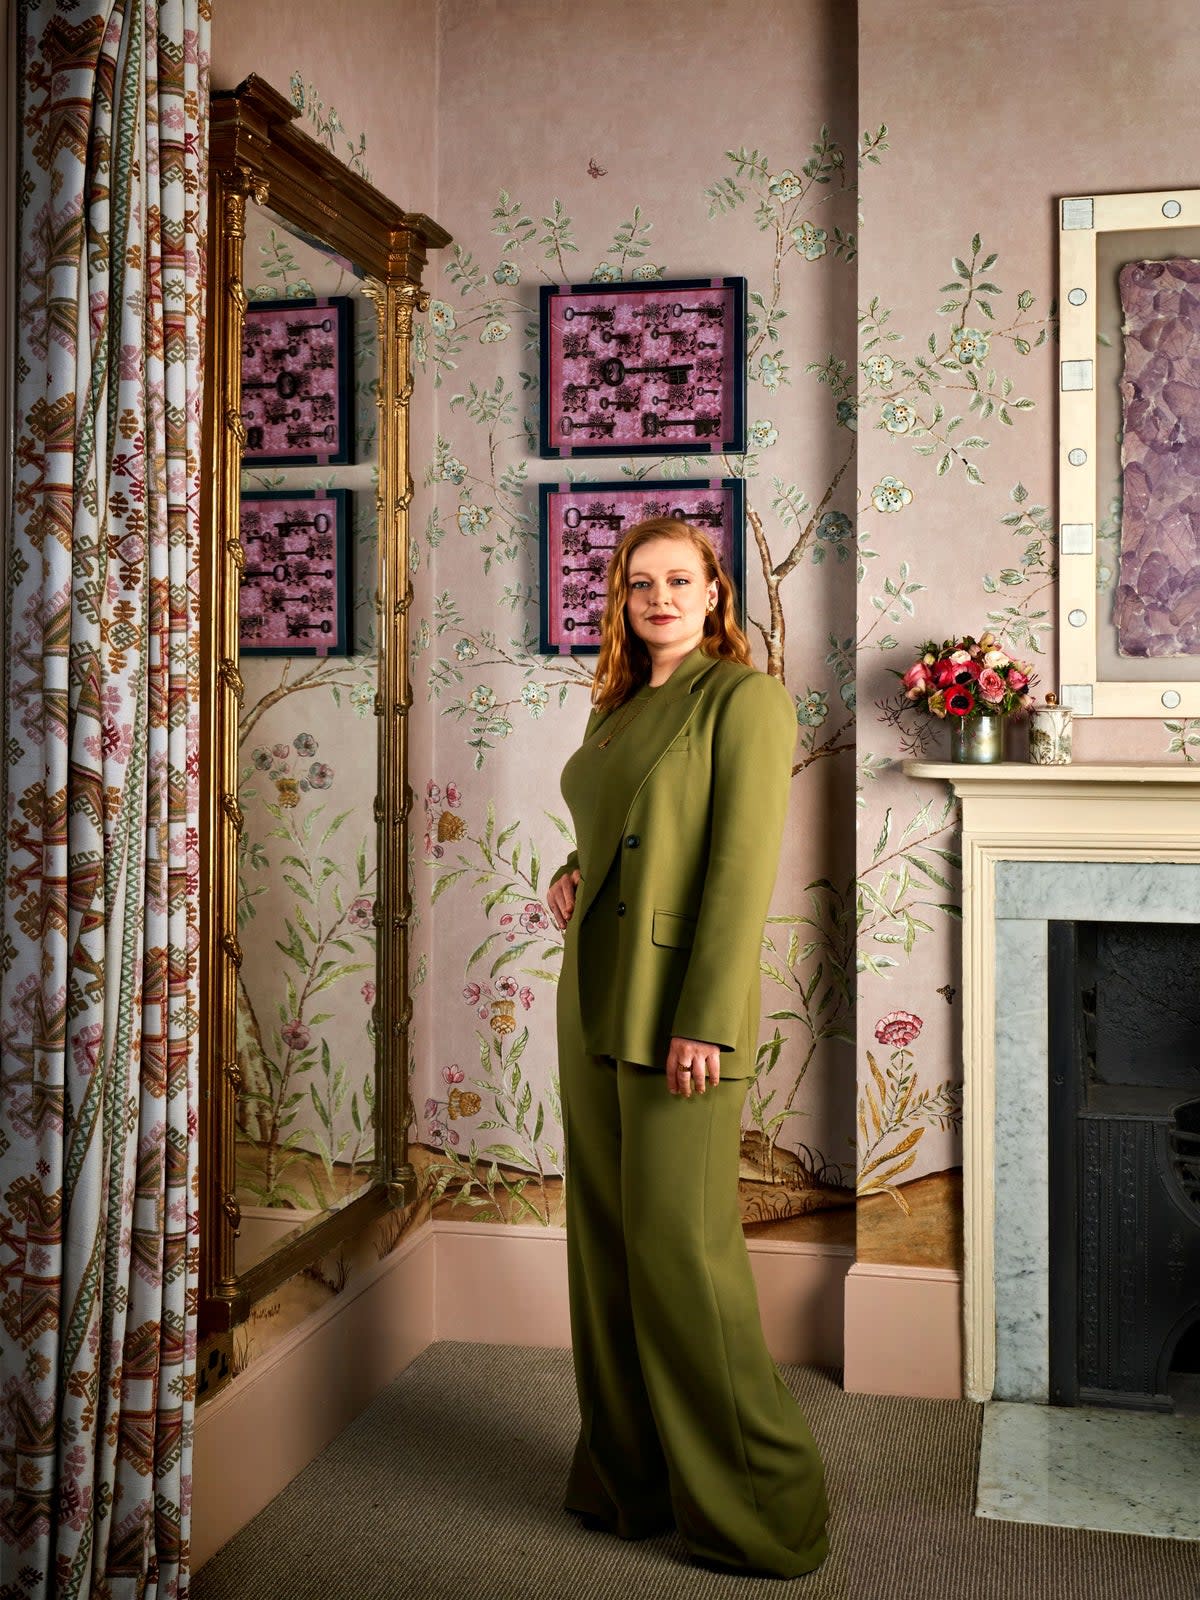 Sarah Snook in her dressing room, Theatre Royal Haymarket (Courtesy of the theatre and Kit Kemp Design Studio, photo by Simon Brown)